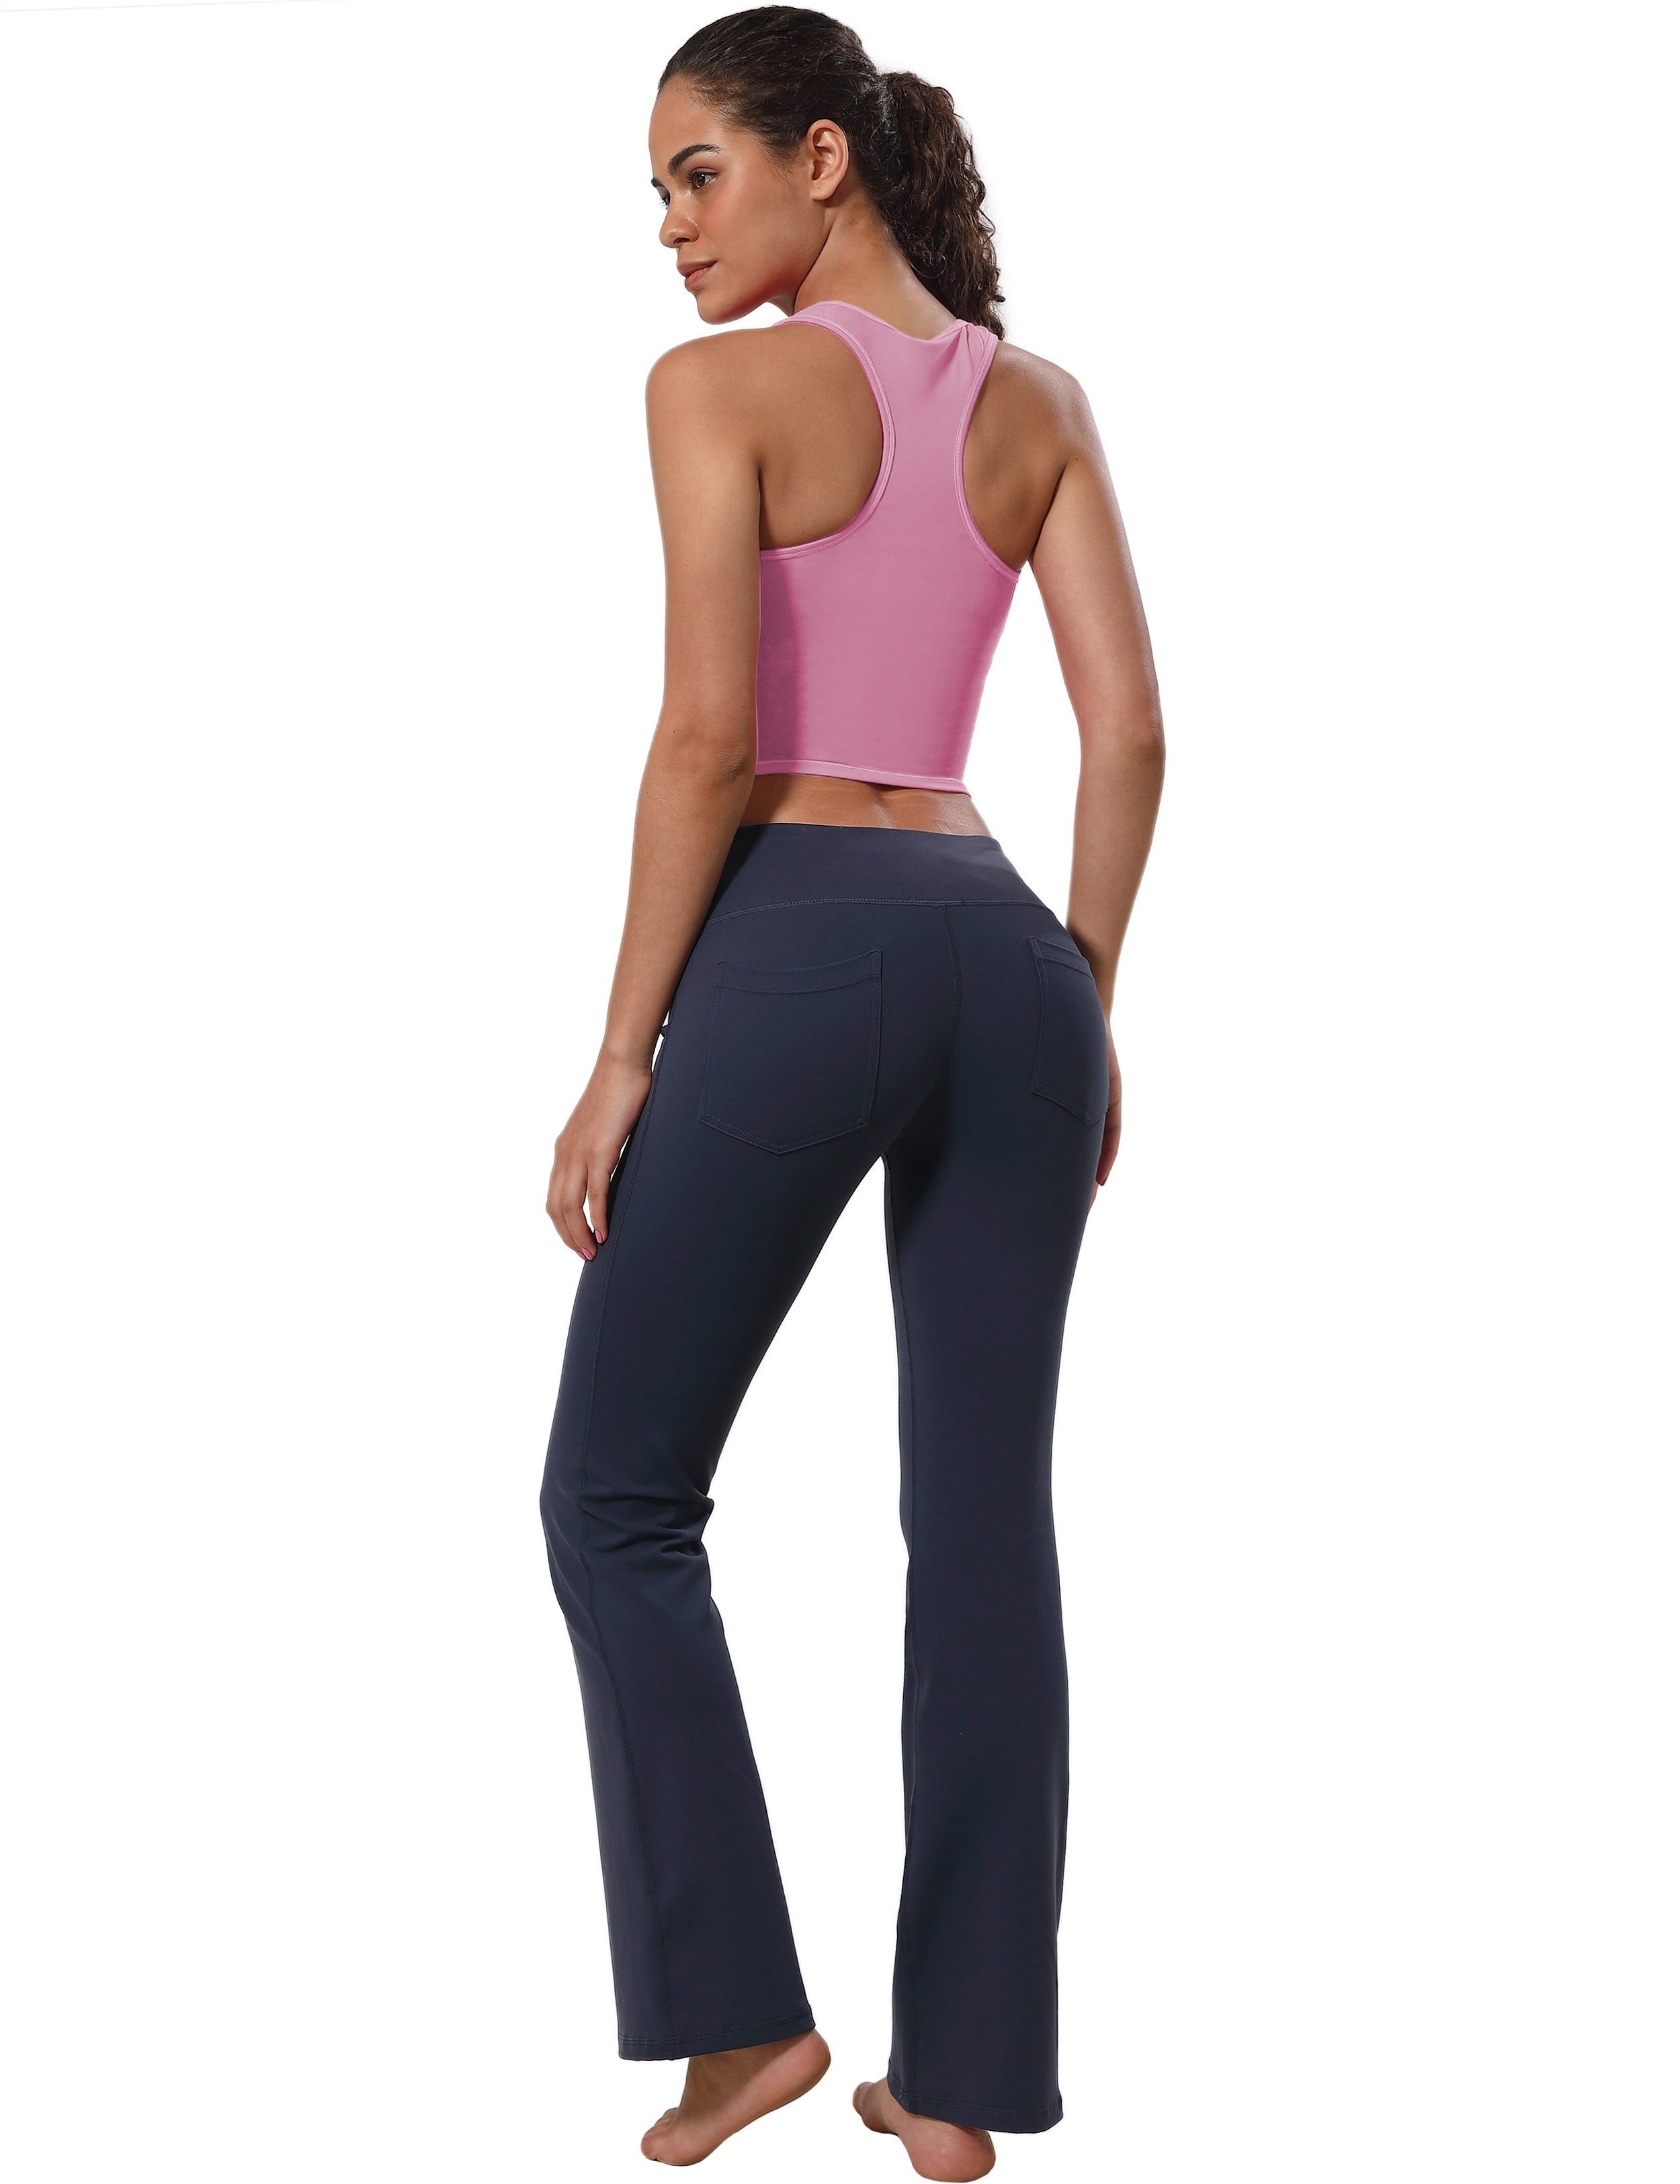 Racerback Athletic Crop Tank Tops lightpink 92%Nylon/8%Spandex(Cotton Soft) Designed for Golf Tight Fit So buttery soft, it feels weightless Sweat-wicking Four-way stretch Breathable Contours your body Sits below the waistband for moderate, everyday coverage